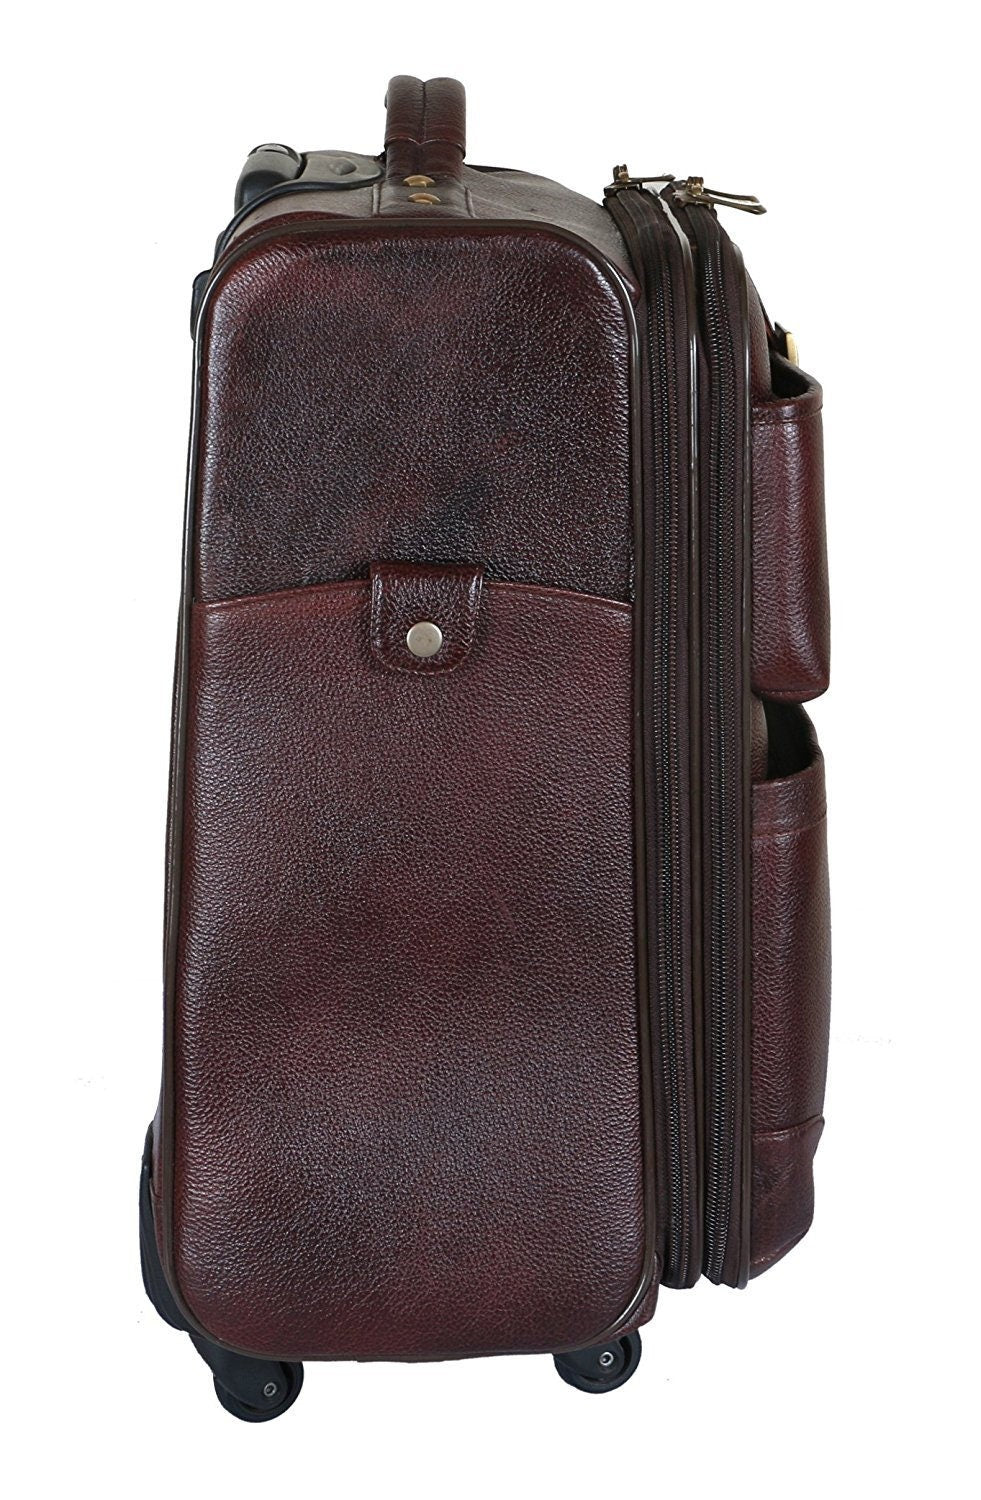 Leather Travel Bag  Leather Luggage Bags  Leather Briefcase